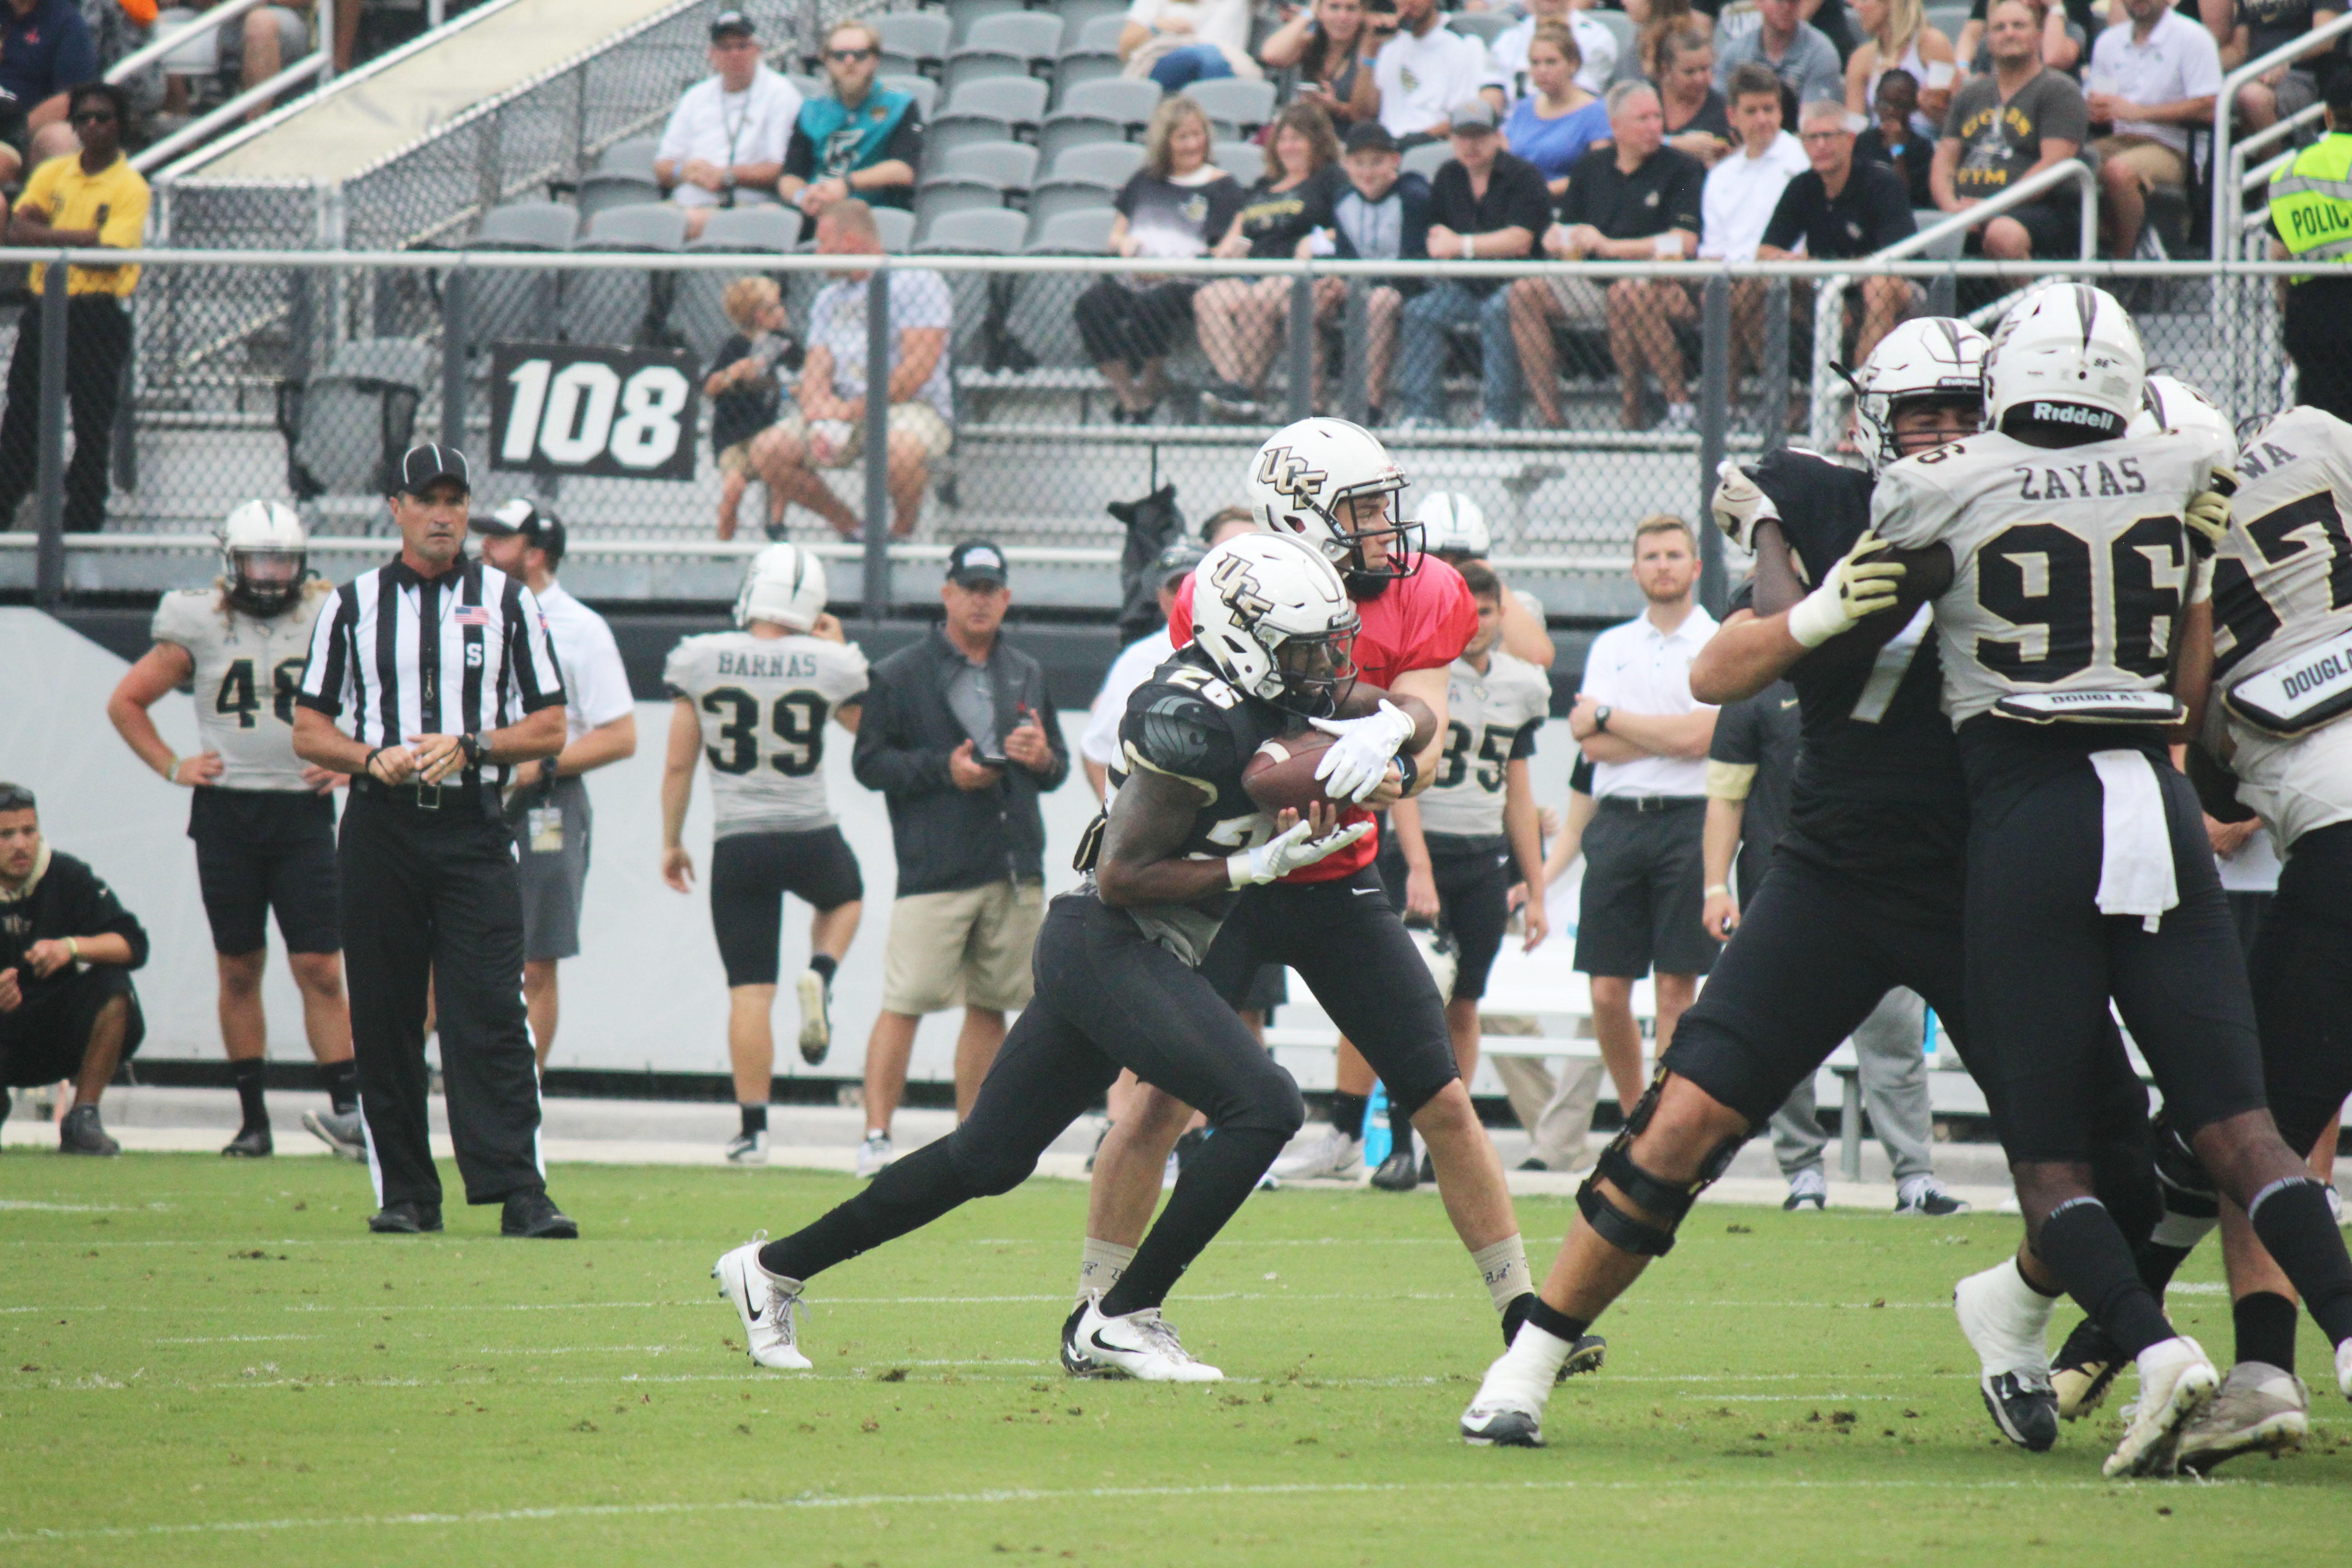 Gallery UCF Football Spring Game – Knight Sports Now >> UCF Knights